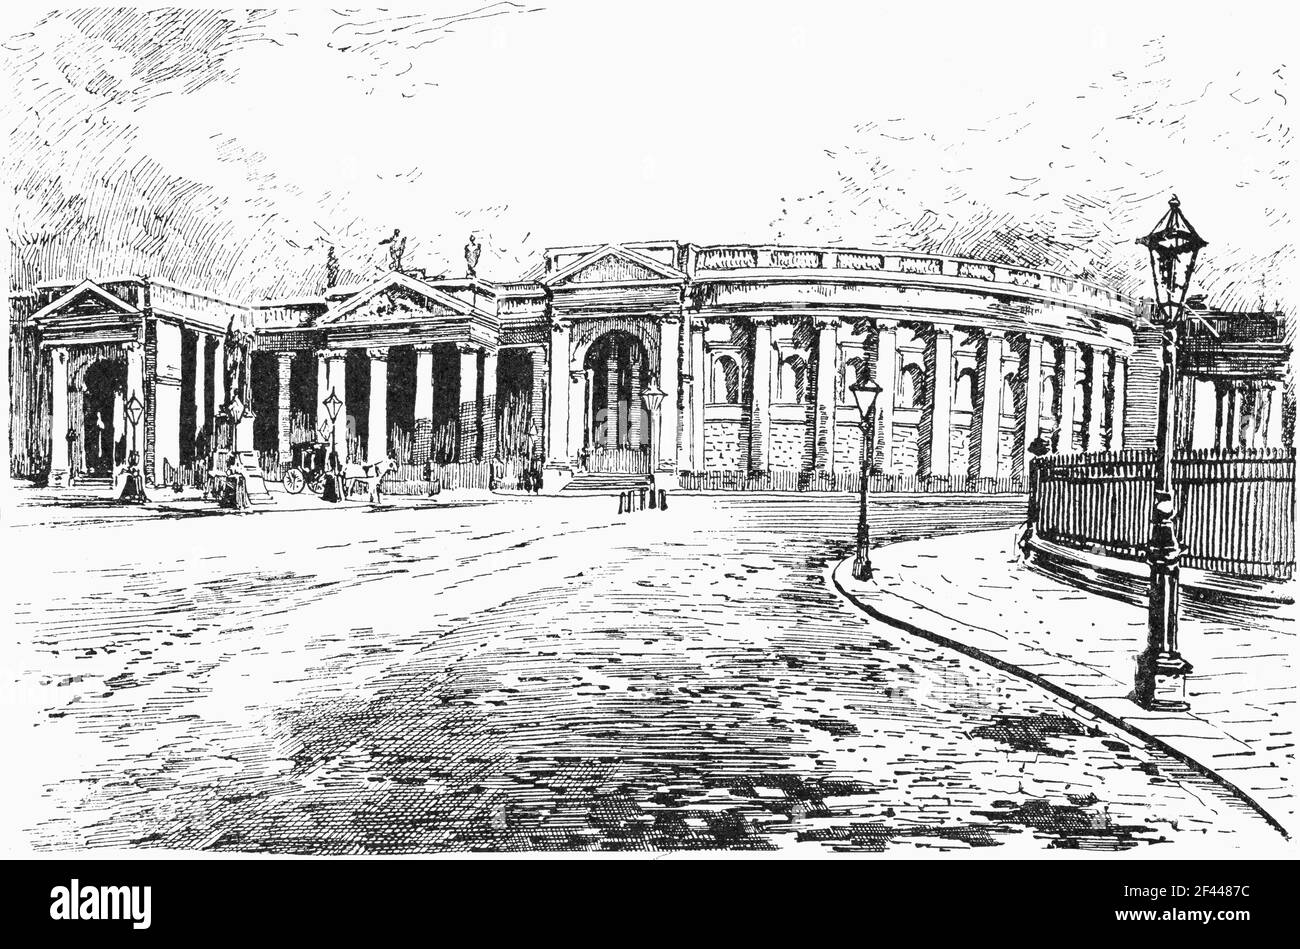 19th Century illustration of the Bank of Ireland Building on the corner of College Green, Dublin, Ireland, built in 1729 was originally Ireland’s Parliament Building. Designed by Edward Lovett Pearce, it served the chambers for the Lords and for the Commons for the Irish Parliament of ‘The Kingdom of Ireland’ for most of the 1700s until the 1801 Act of Union shifted power back to London. The  building was sold to the Bank of Ireland under the condition that it should not be used for political assemblies. Stock Photo